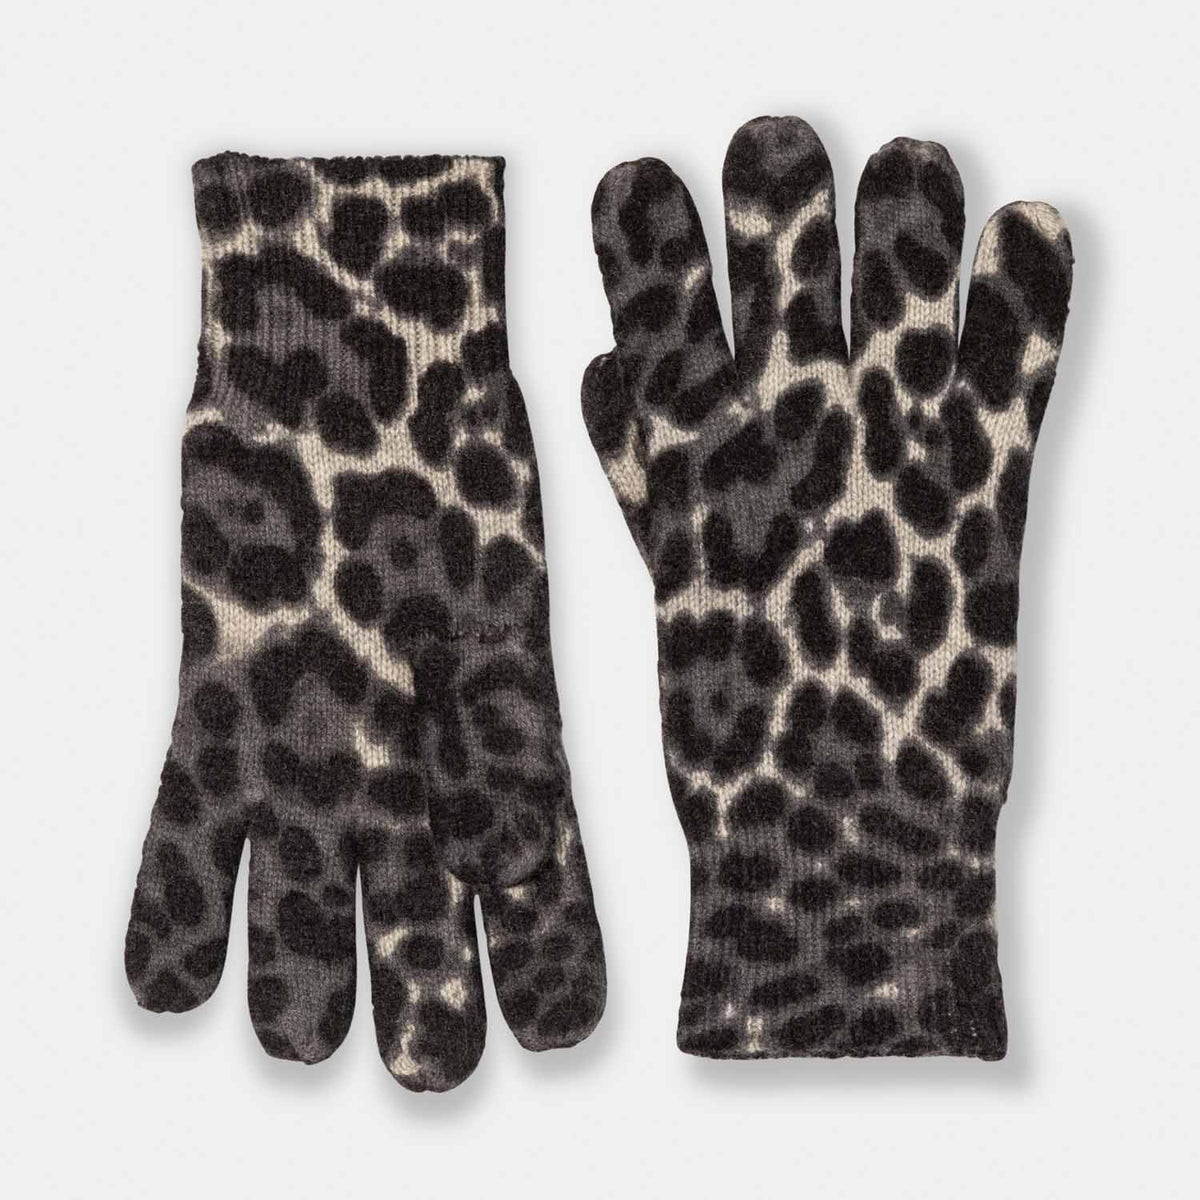 Picture of cashmere knit leopard print gloves, grey and black.